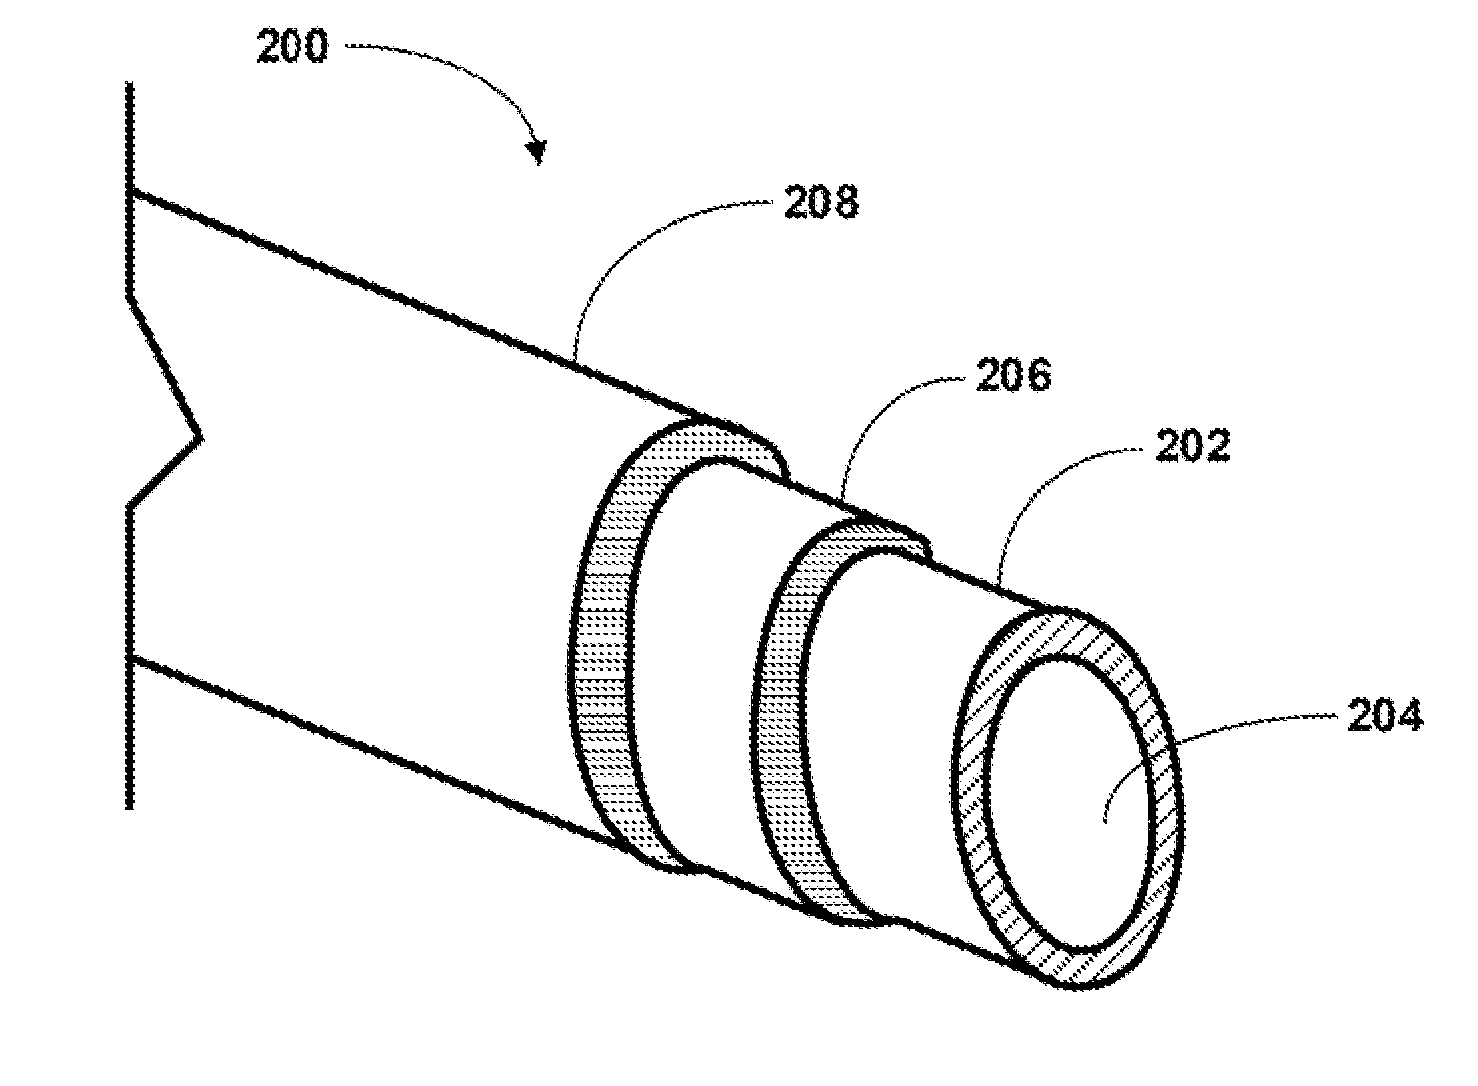 Fuel Rod Cladding and Methods for Making and Using Same